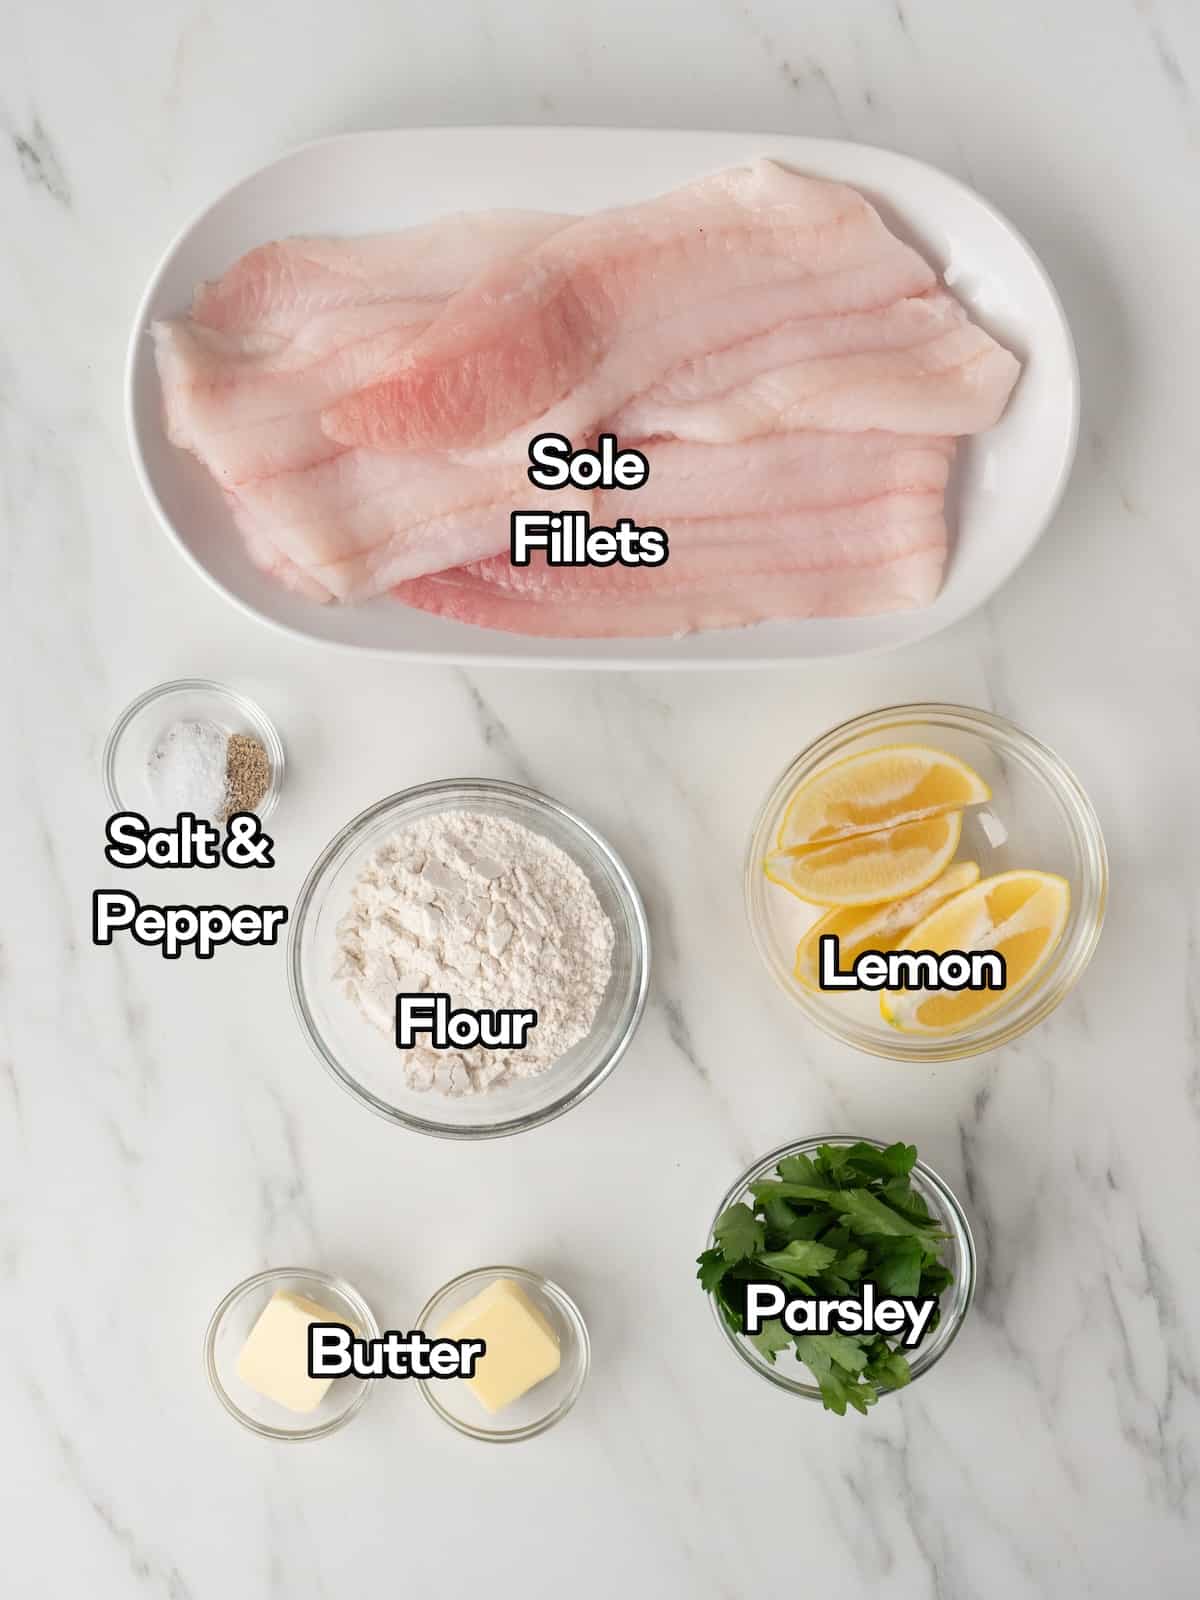 Mise-en-place of all the ingredients required to make pan fried sole with lemon.